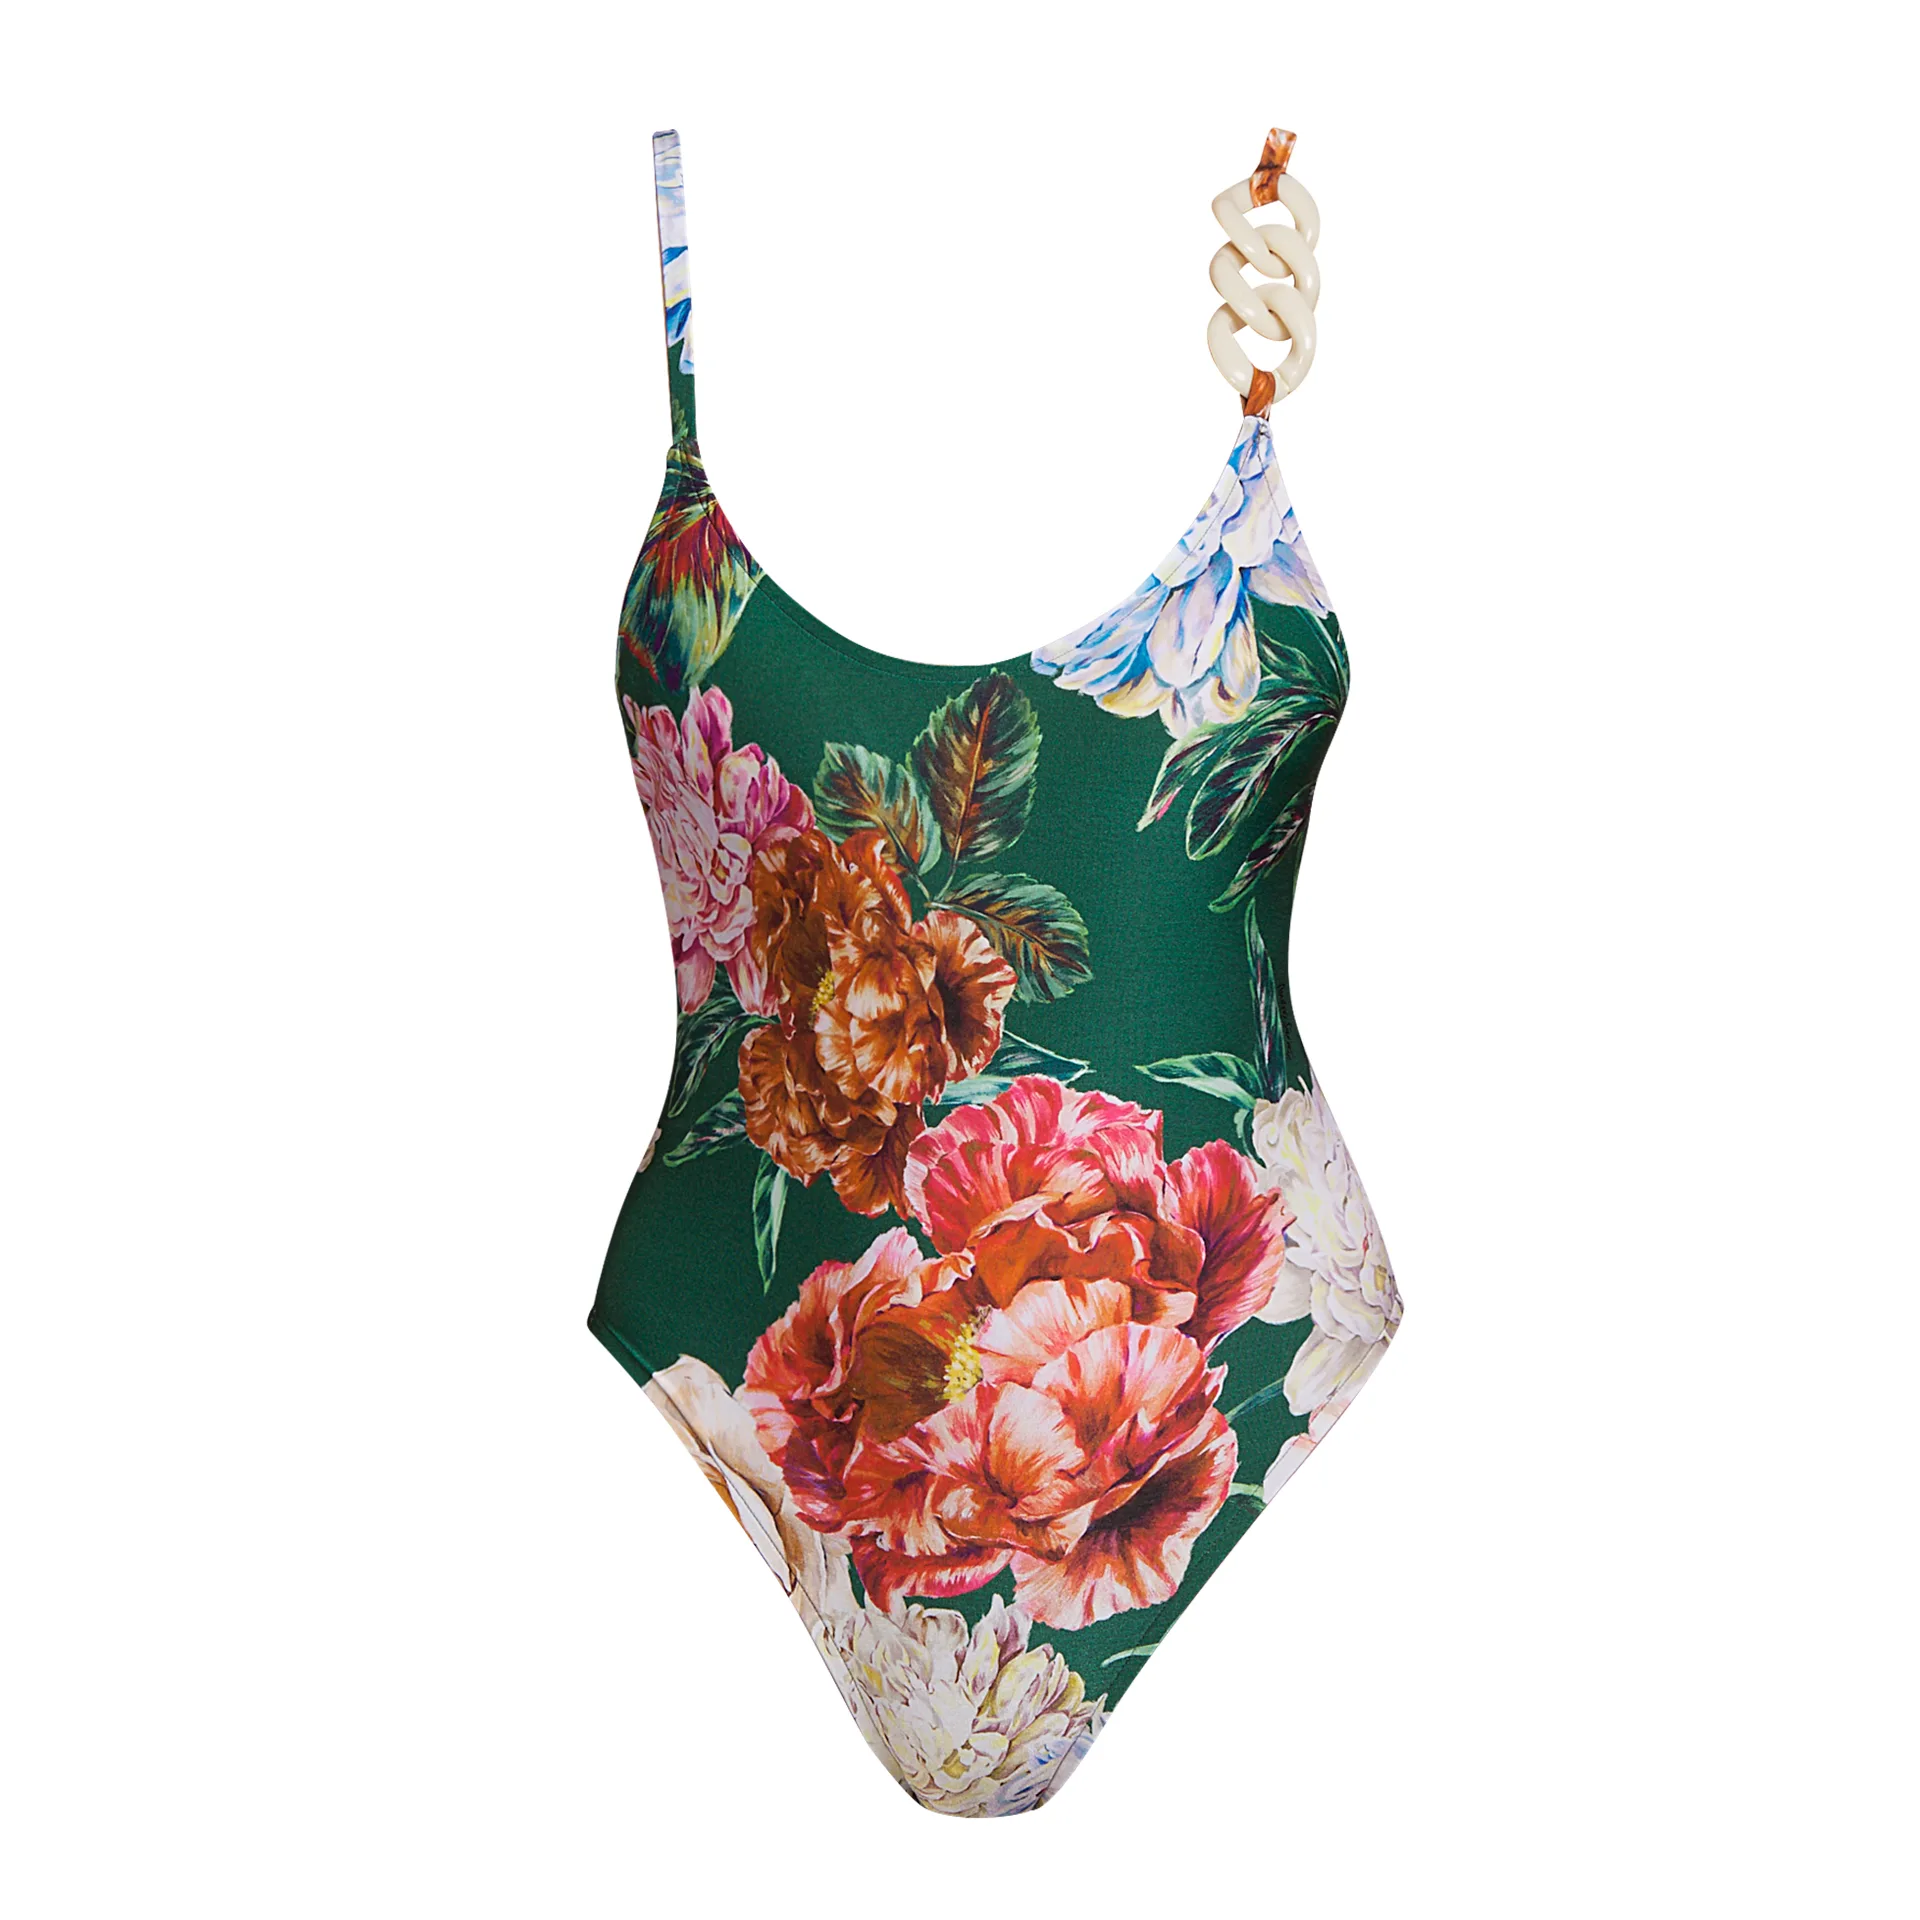 Andres Sarda Swimwear WOOLF garden Swimsuit removable pads